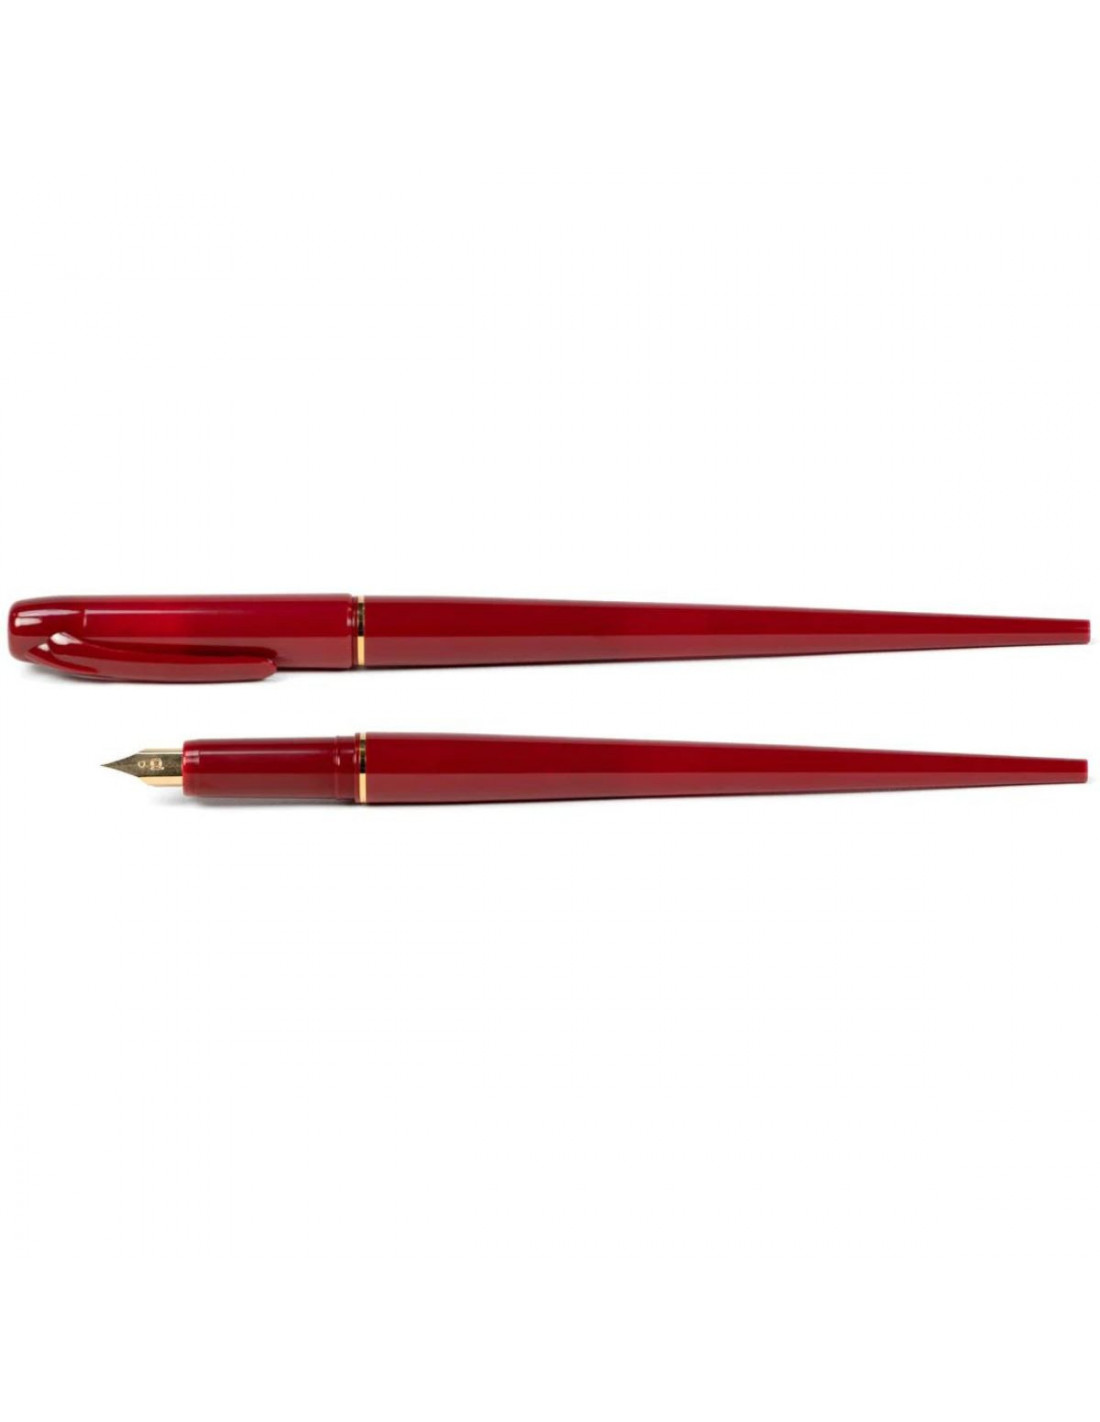 Calligraphy Pen Set- Luxury Dip pen Quill Pen and Ink Set with 5 nibs, –  hhhouu